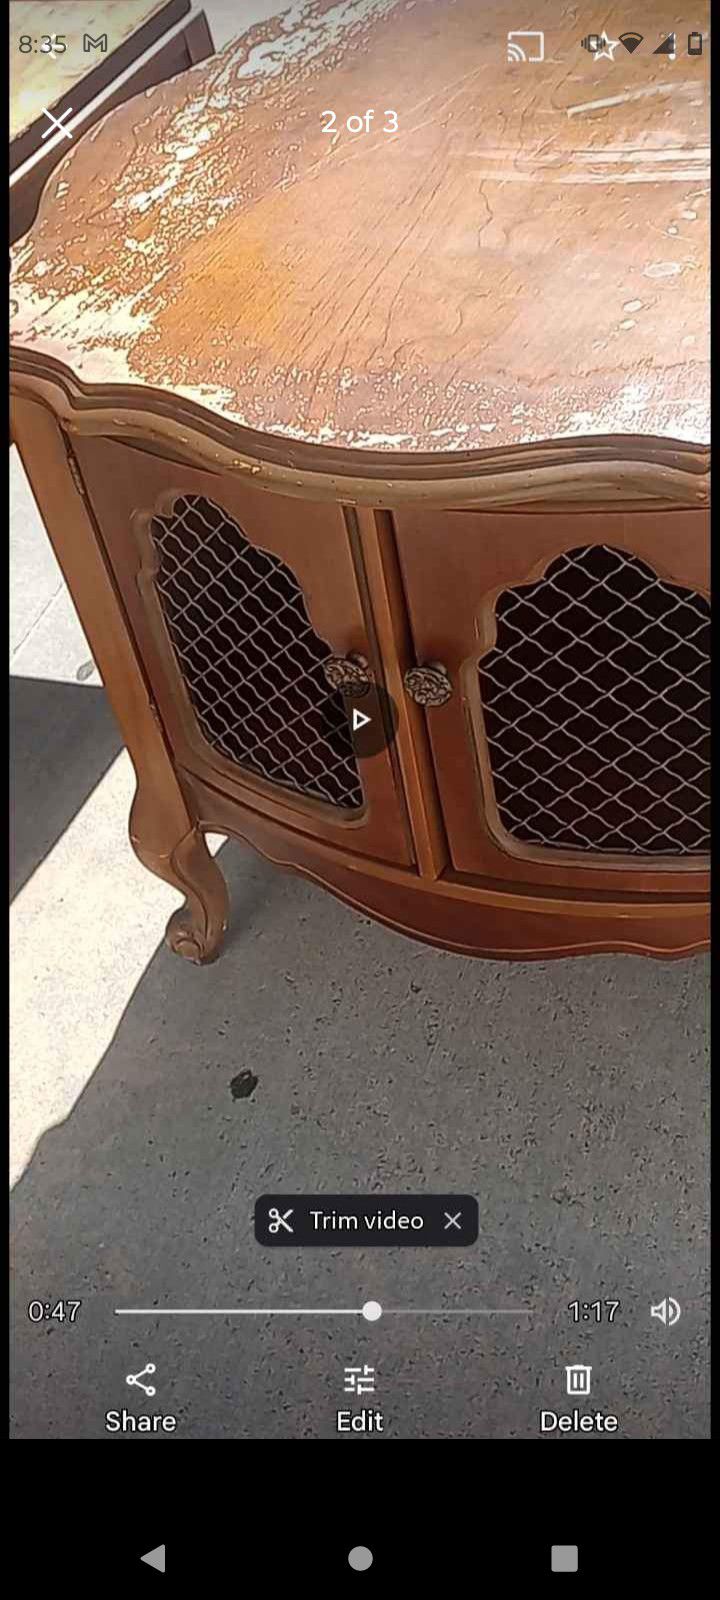 French Provincial Side Table cabinet